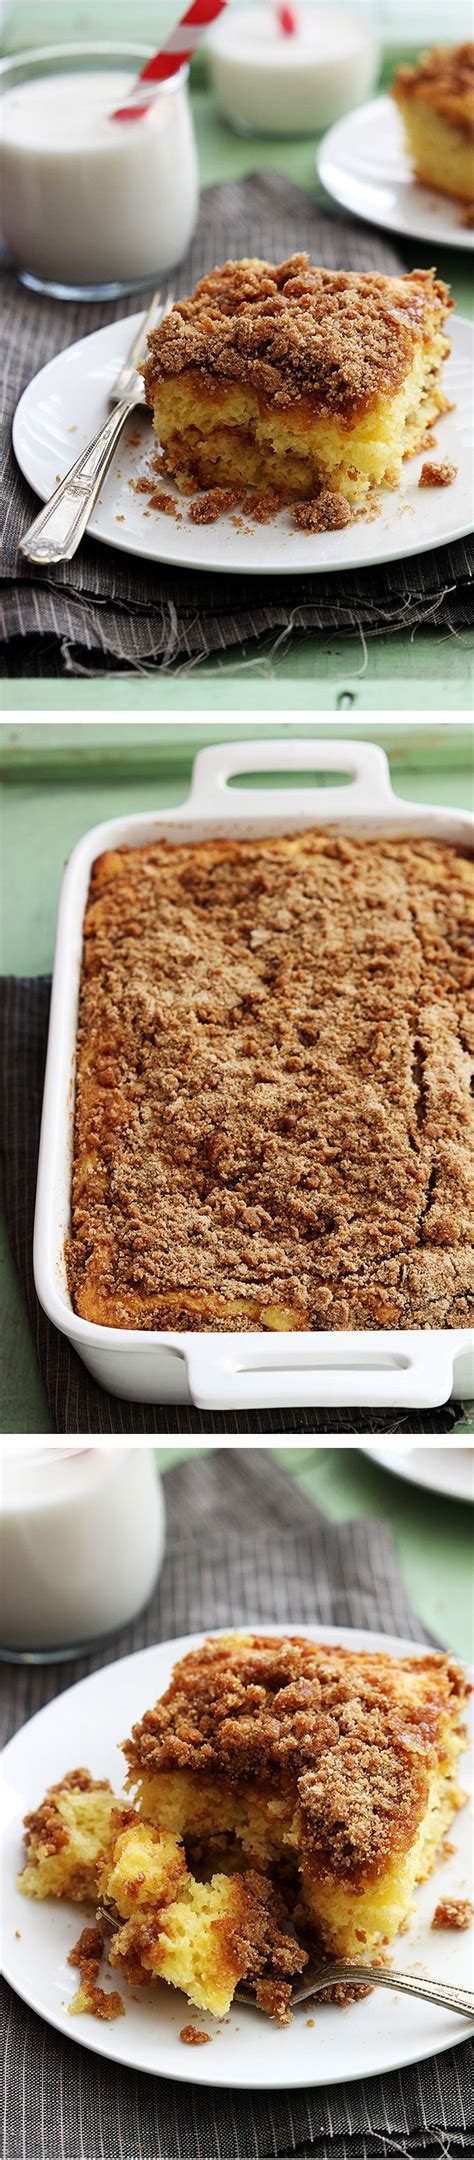 Start with butterscotch for the white cake to improve the flavor, but get creative: Cake Mix Sour Cream Coffee Cake - so easy to make and ...